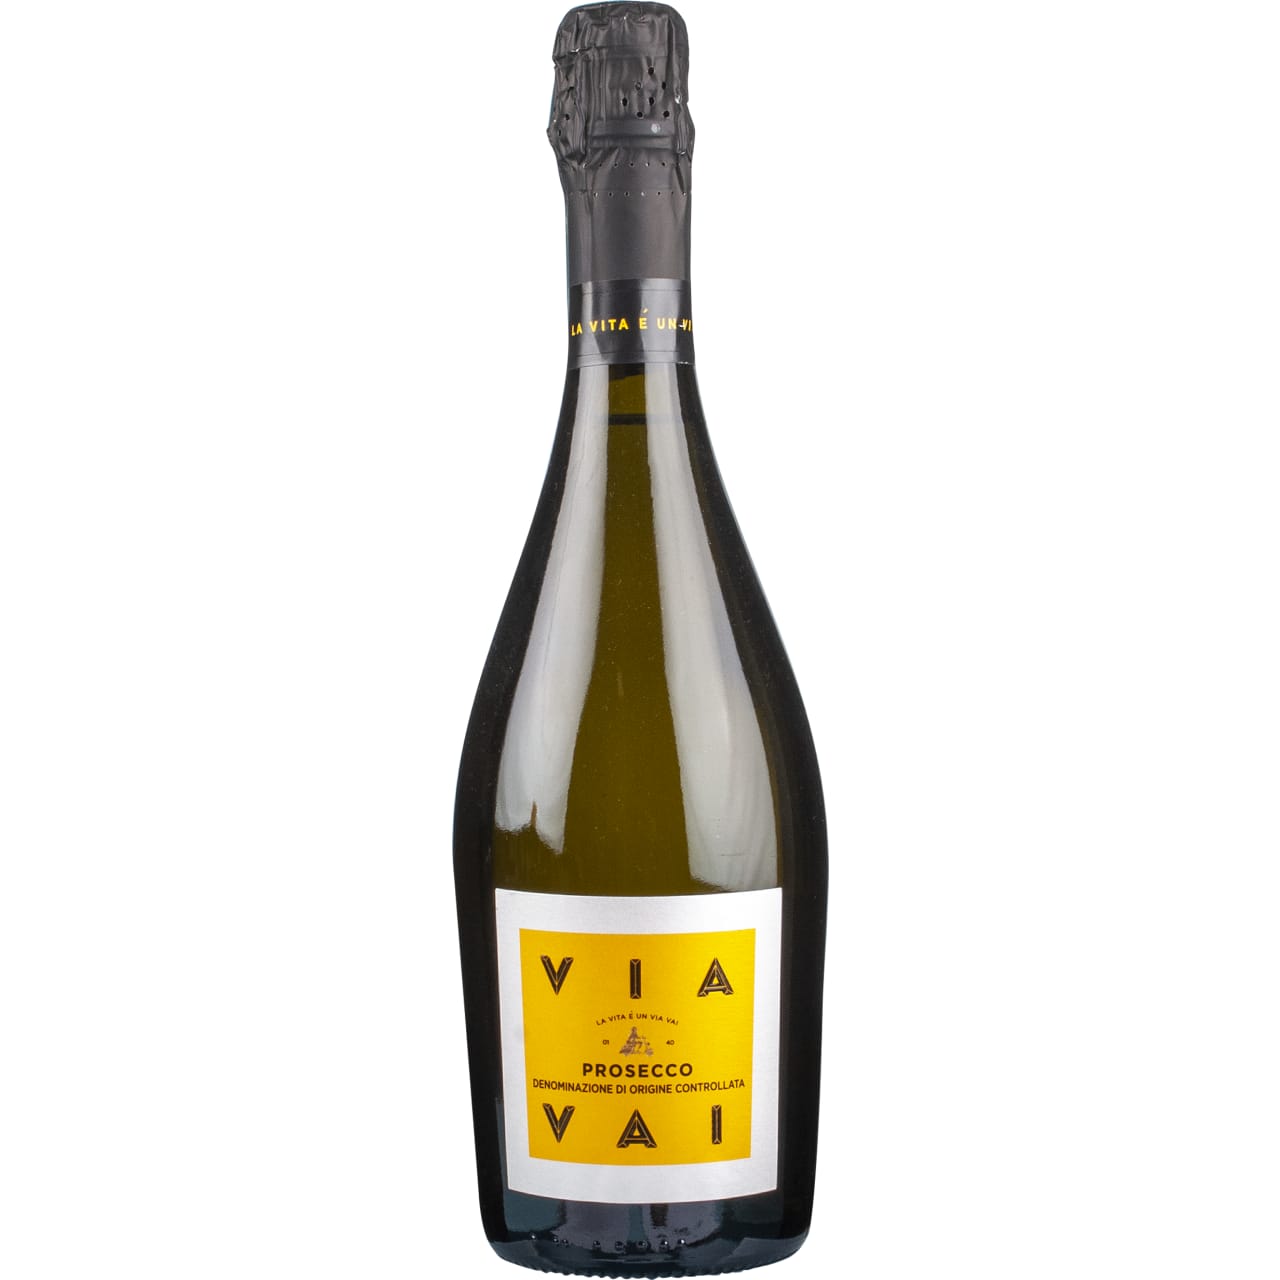 Lively Prosecco, fragrant with white flowers, with a delicate lemon and lime tang in the mouth.